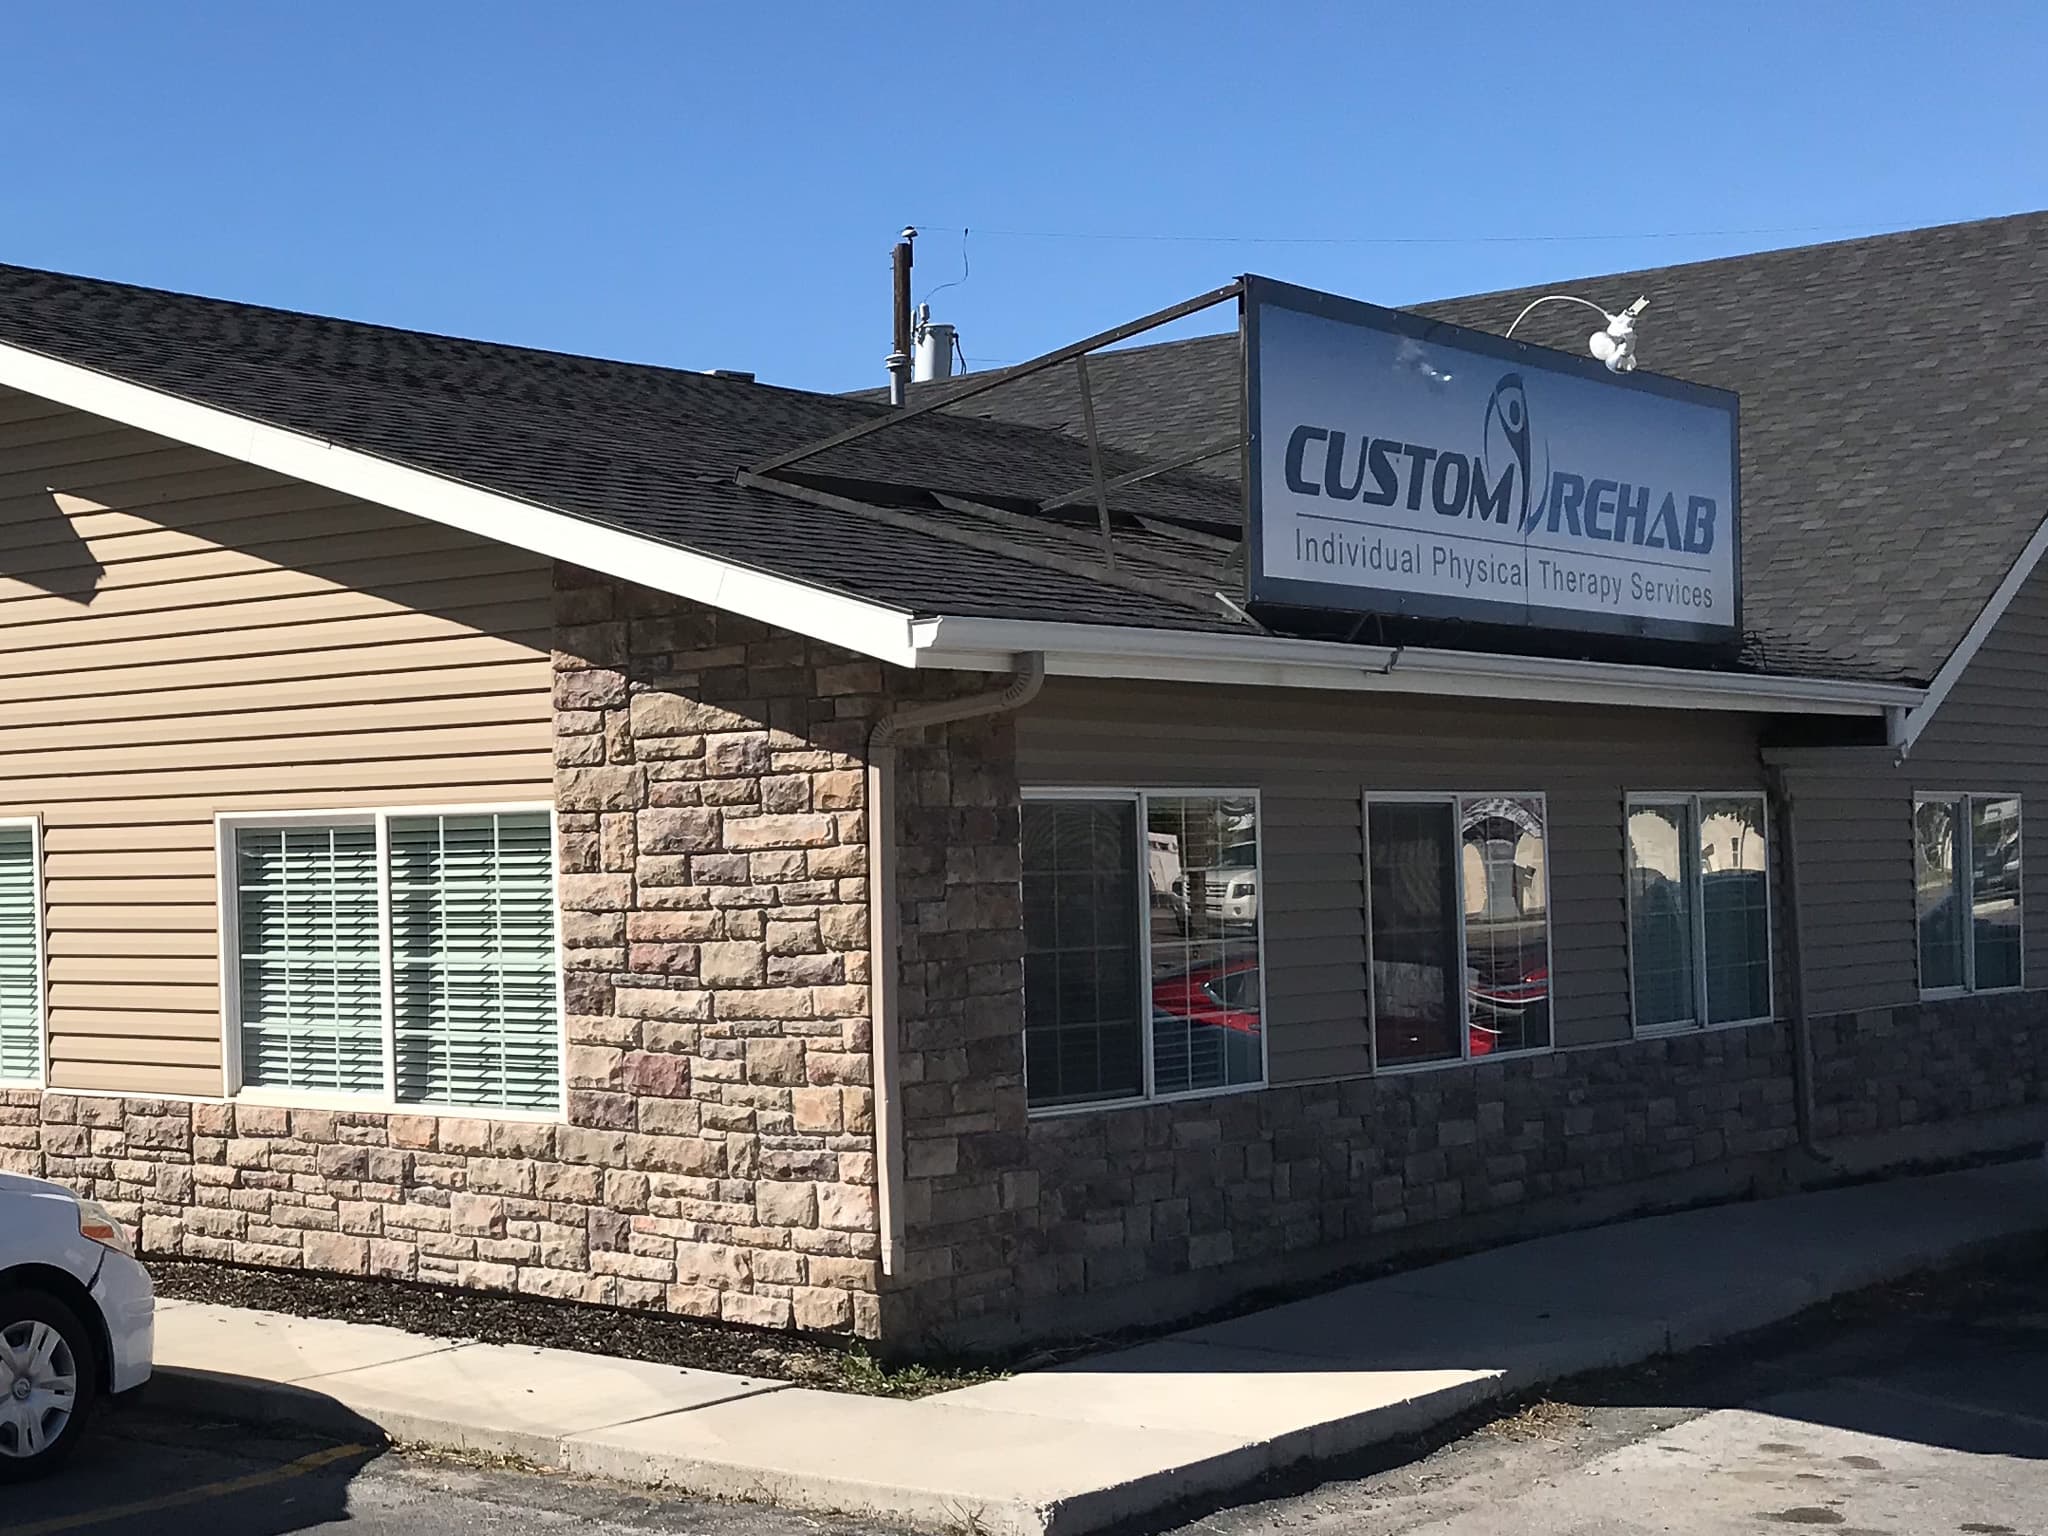 Custom Rehab Physical Therapy - Chubbuck, ID, US, google physical therapist